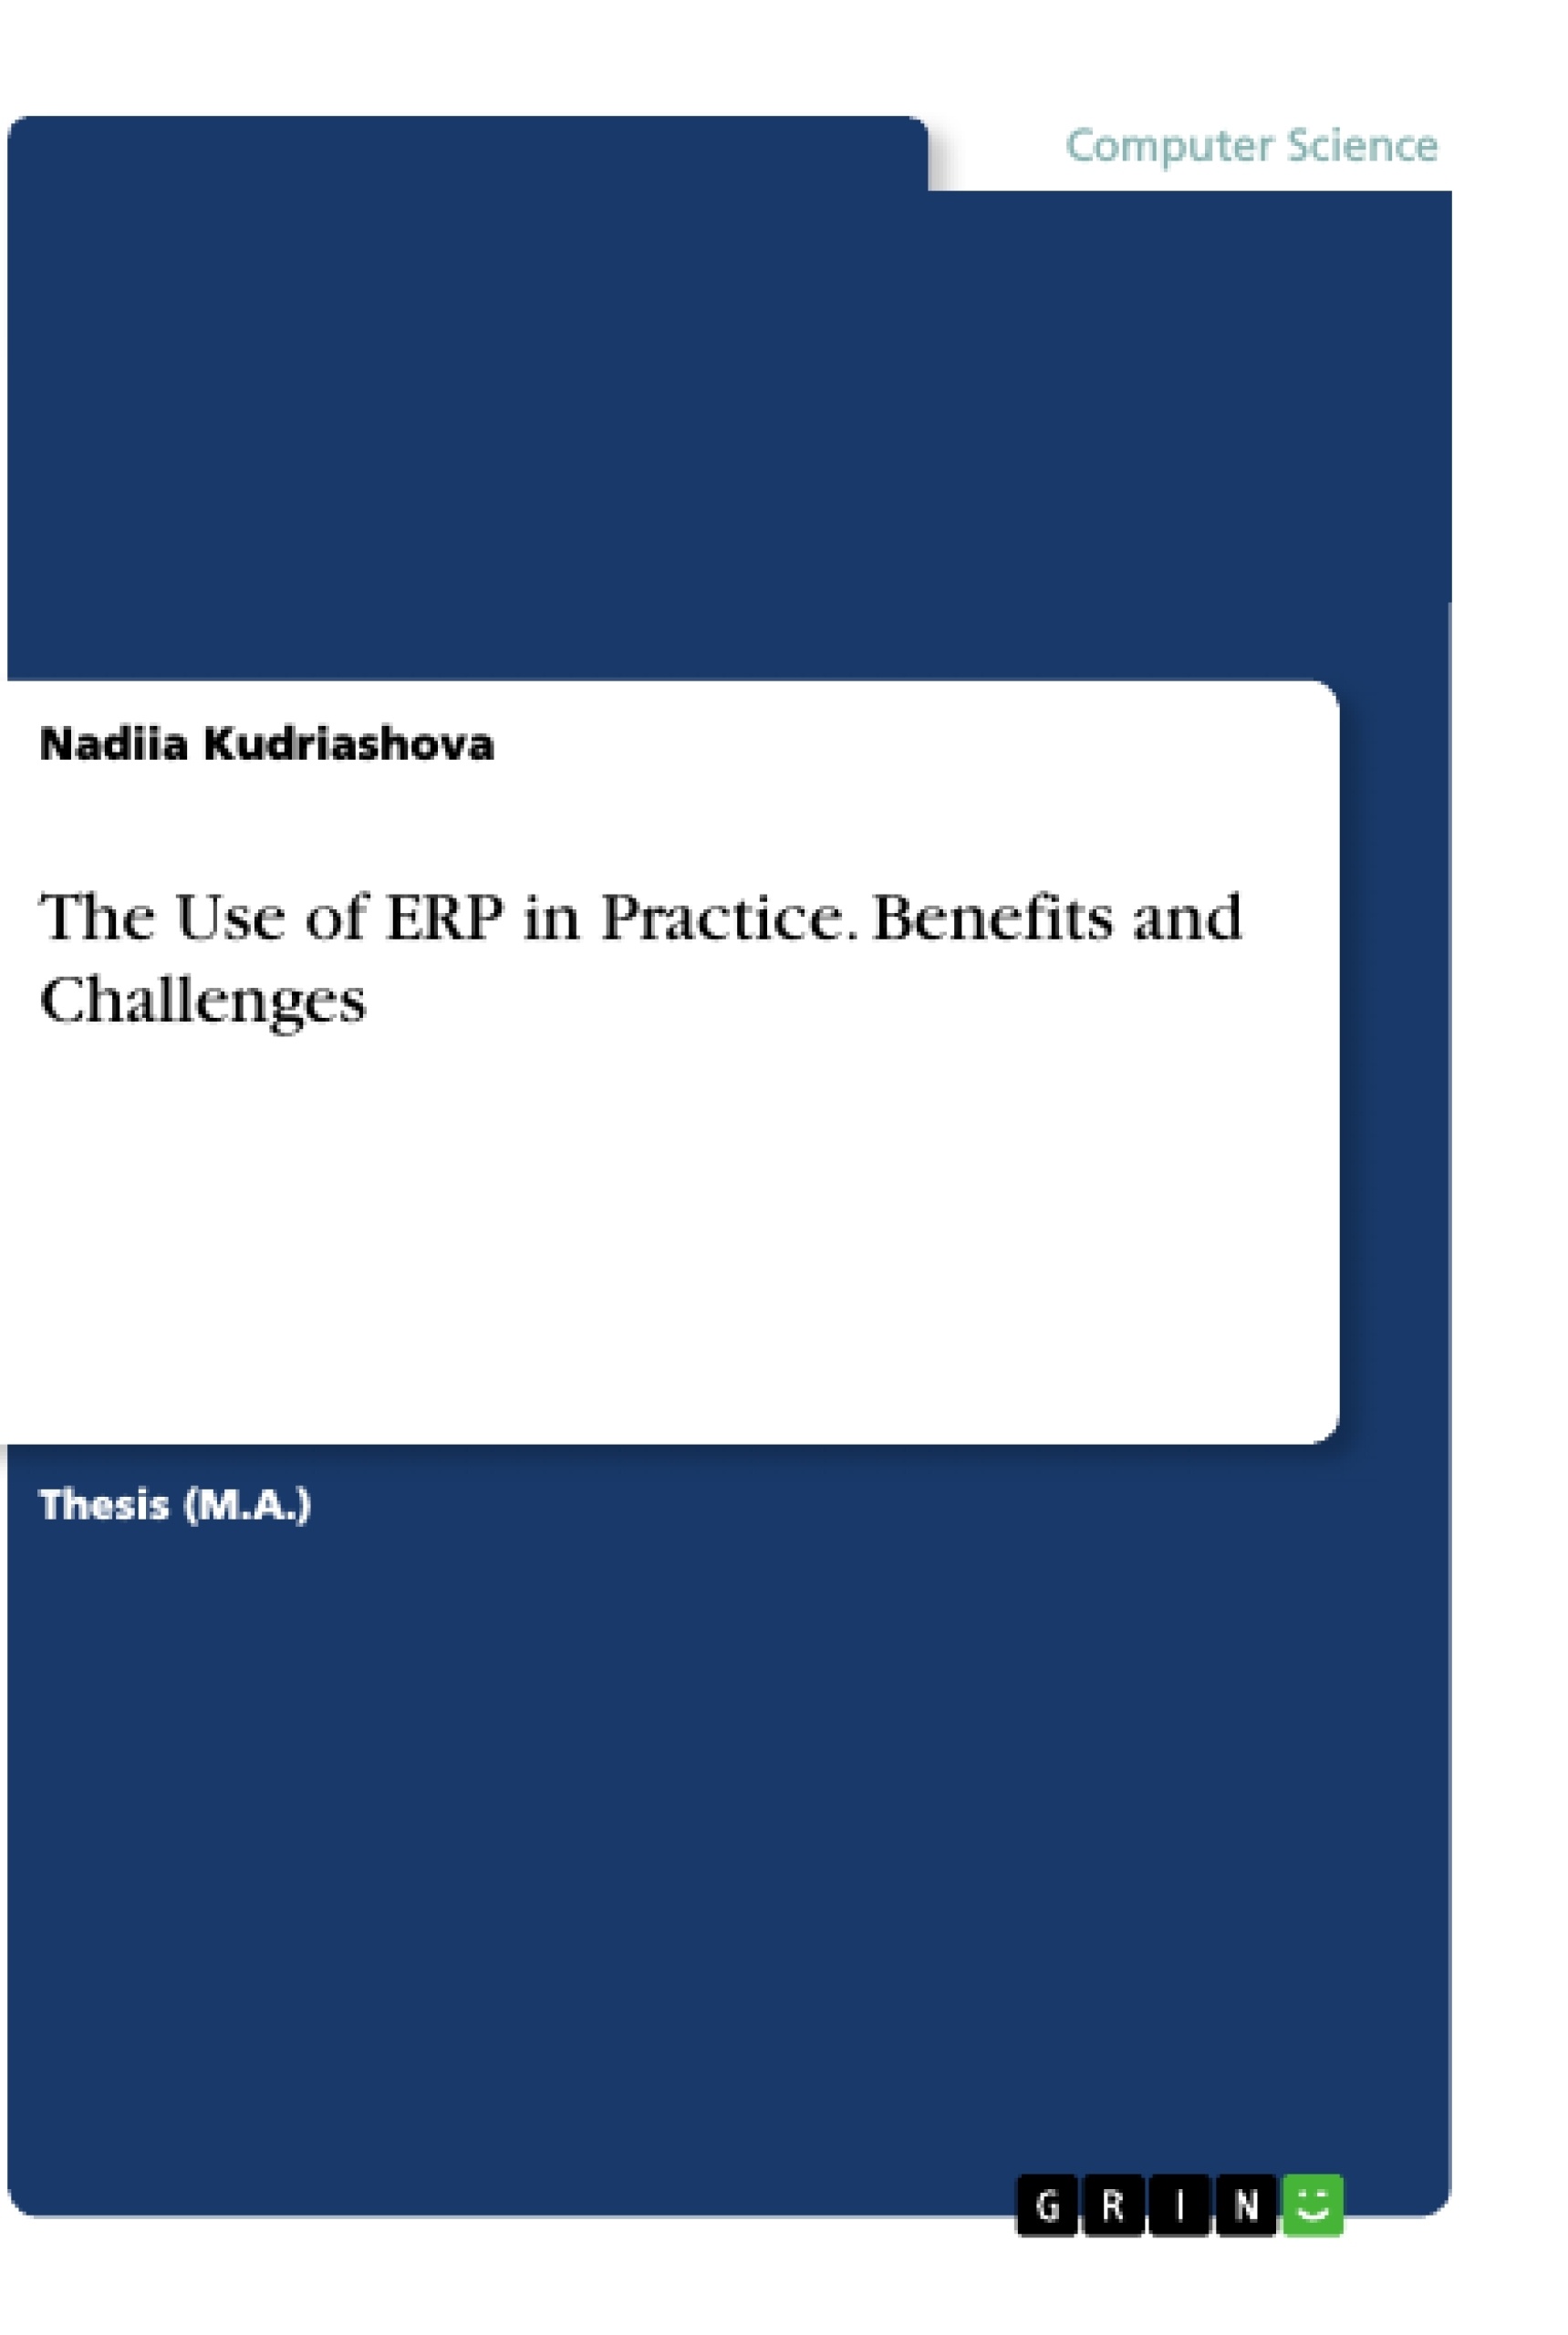 Titre: The Use of ERP in Practice. Benefits and Challenges